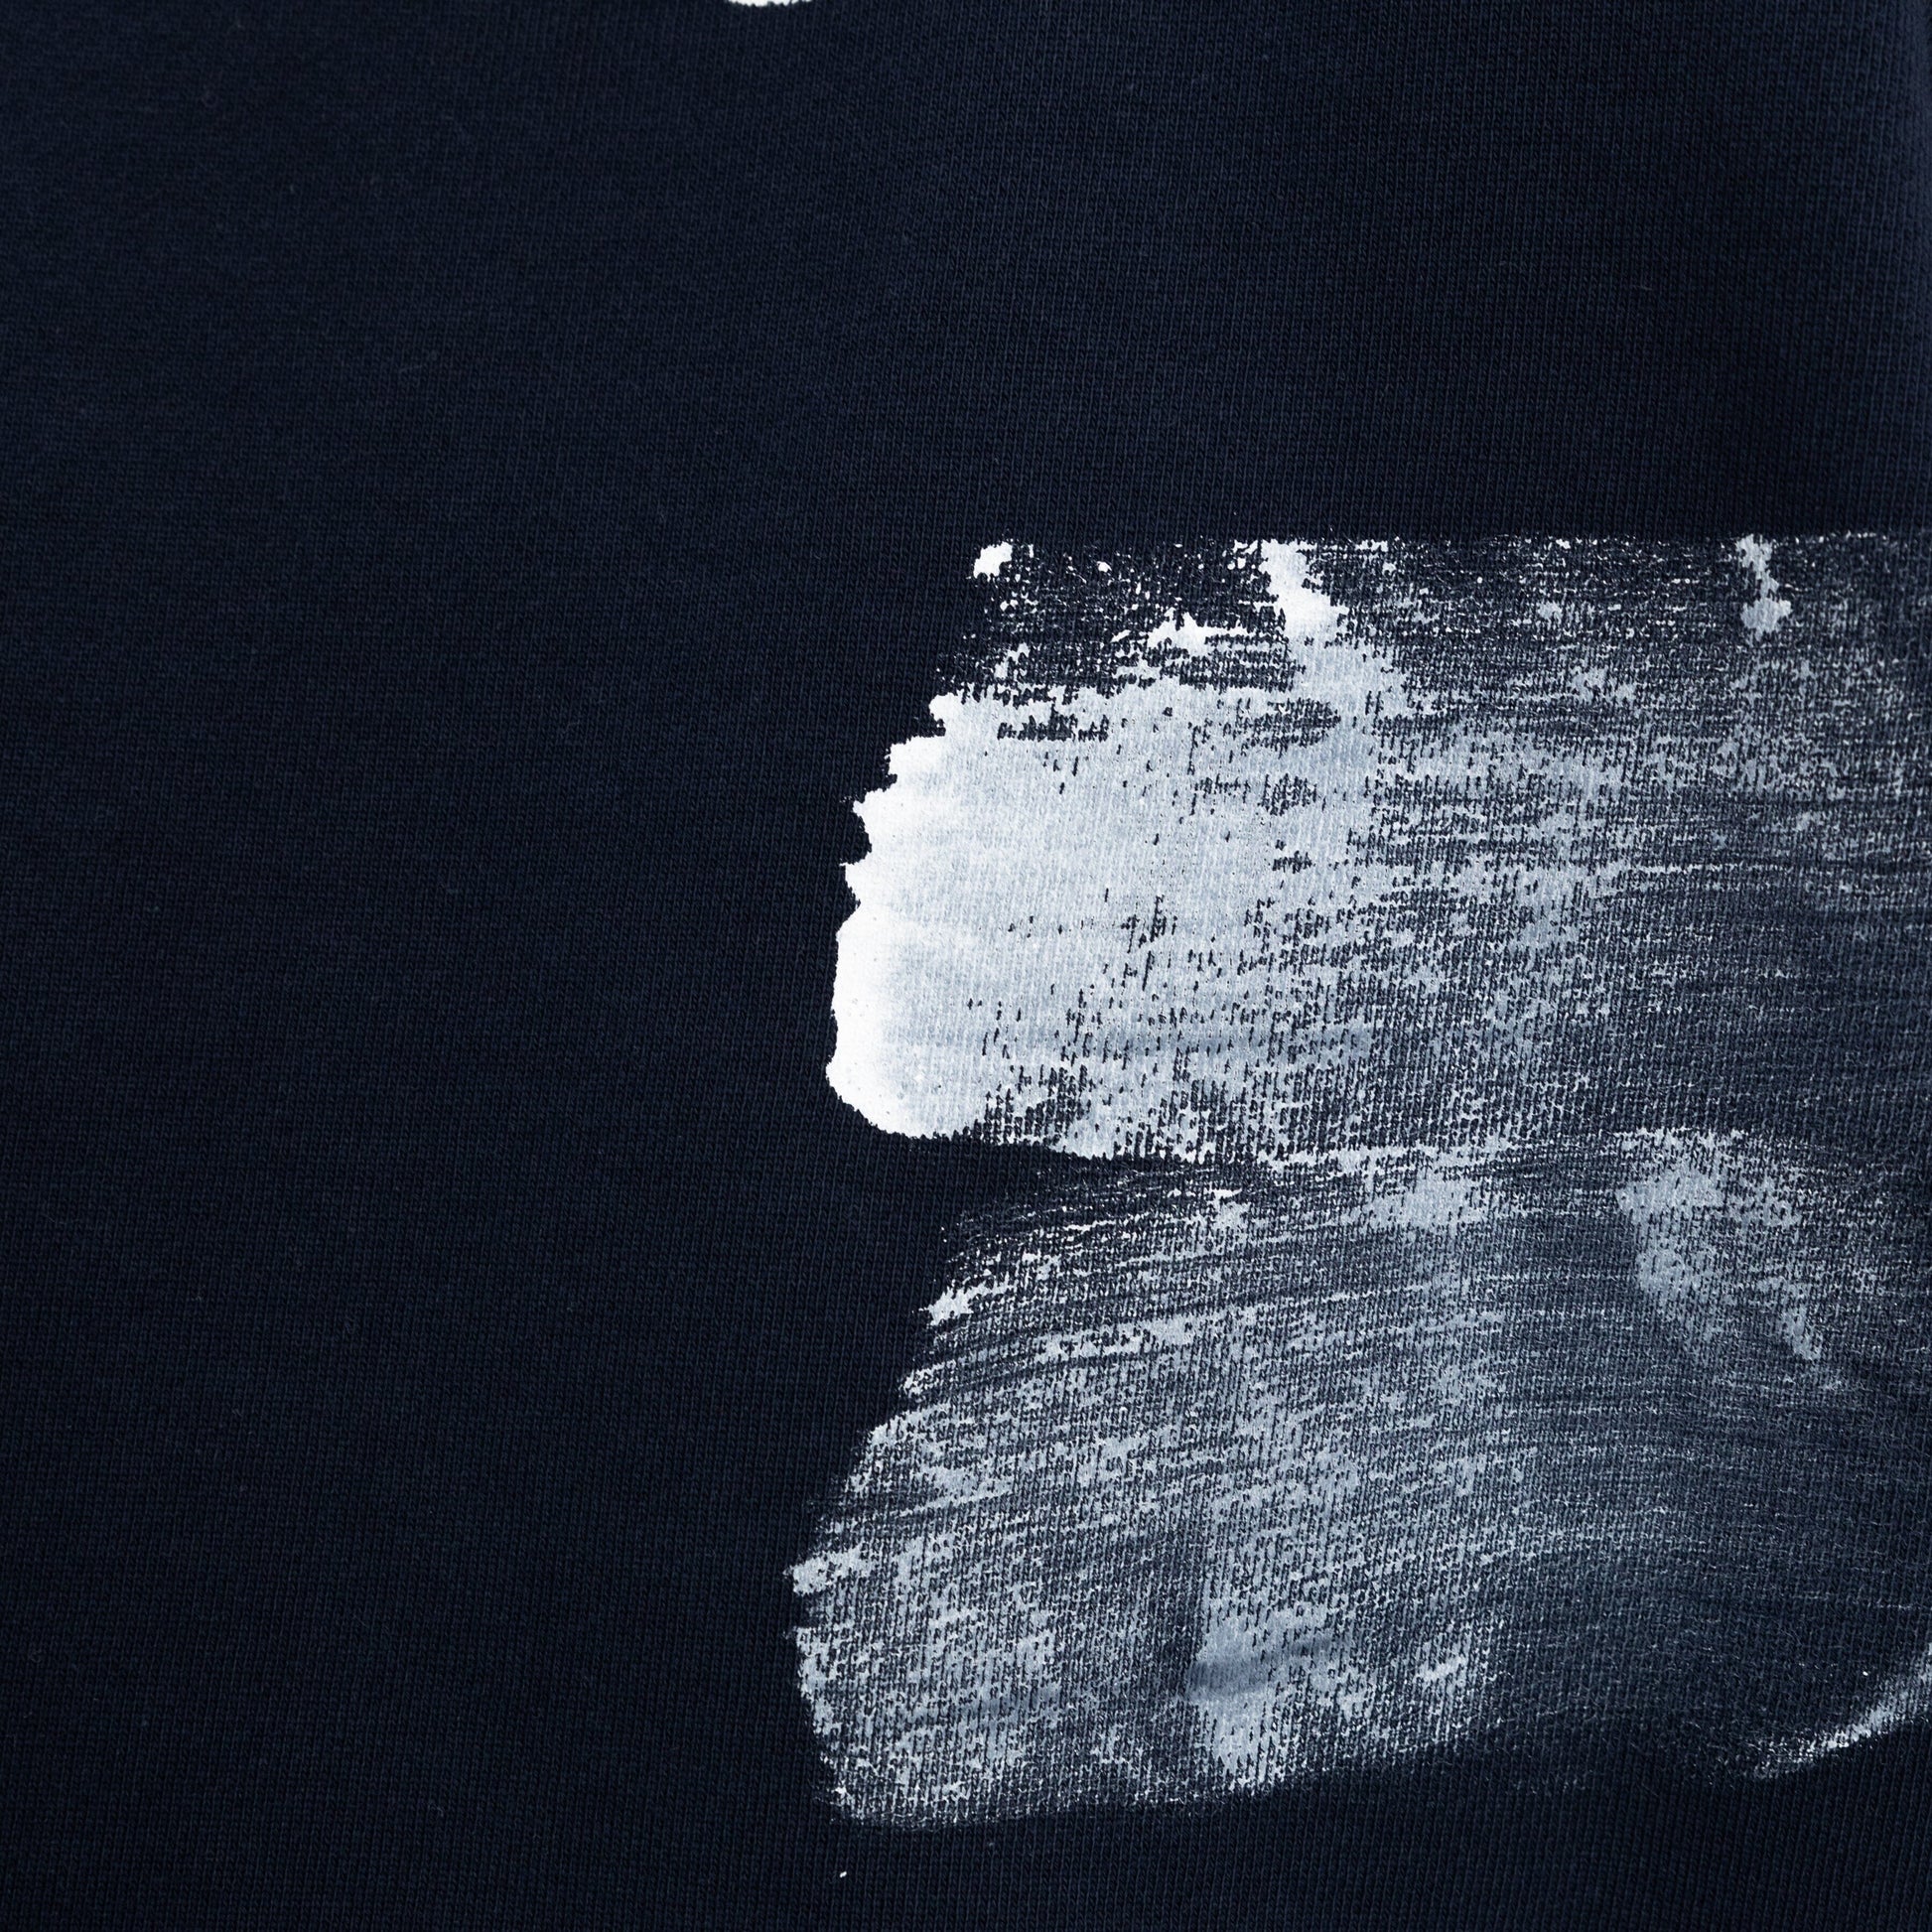 'Atelier' Hoodie with Paint Stains in Navy